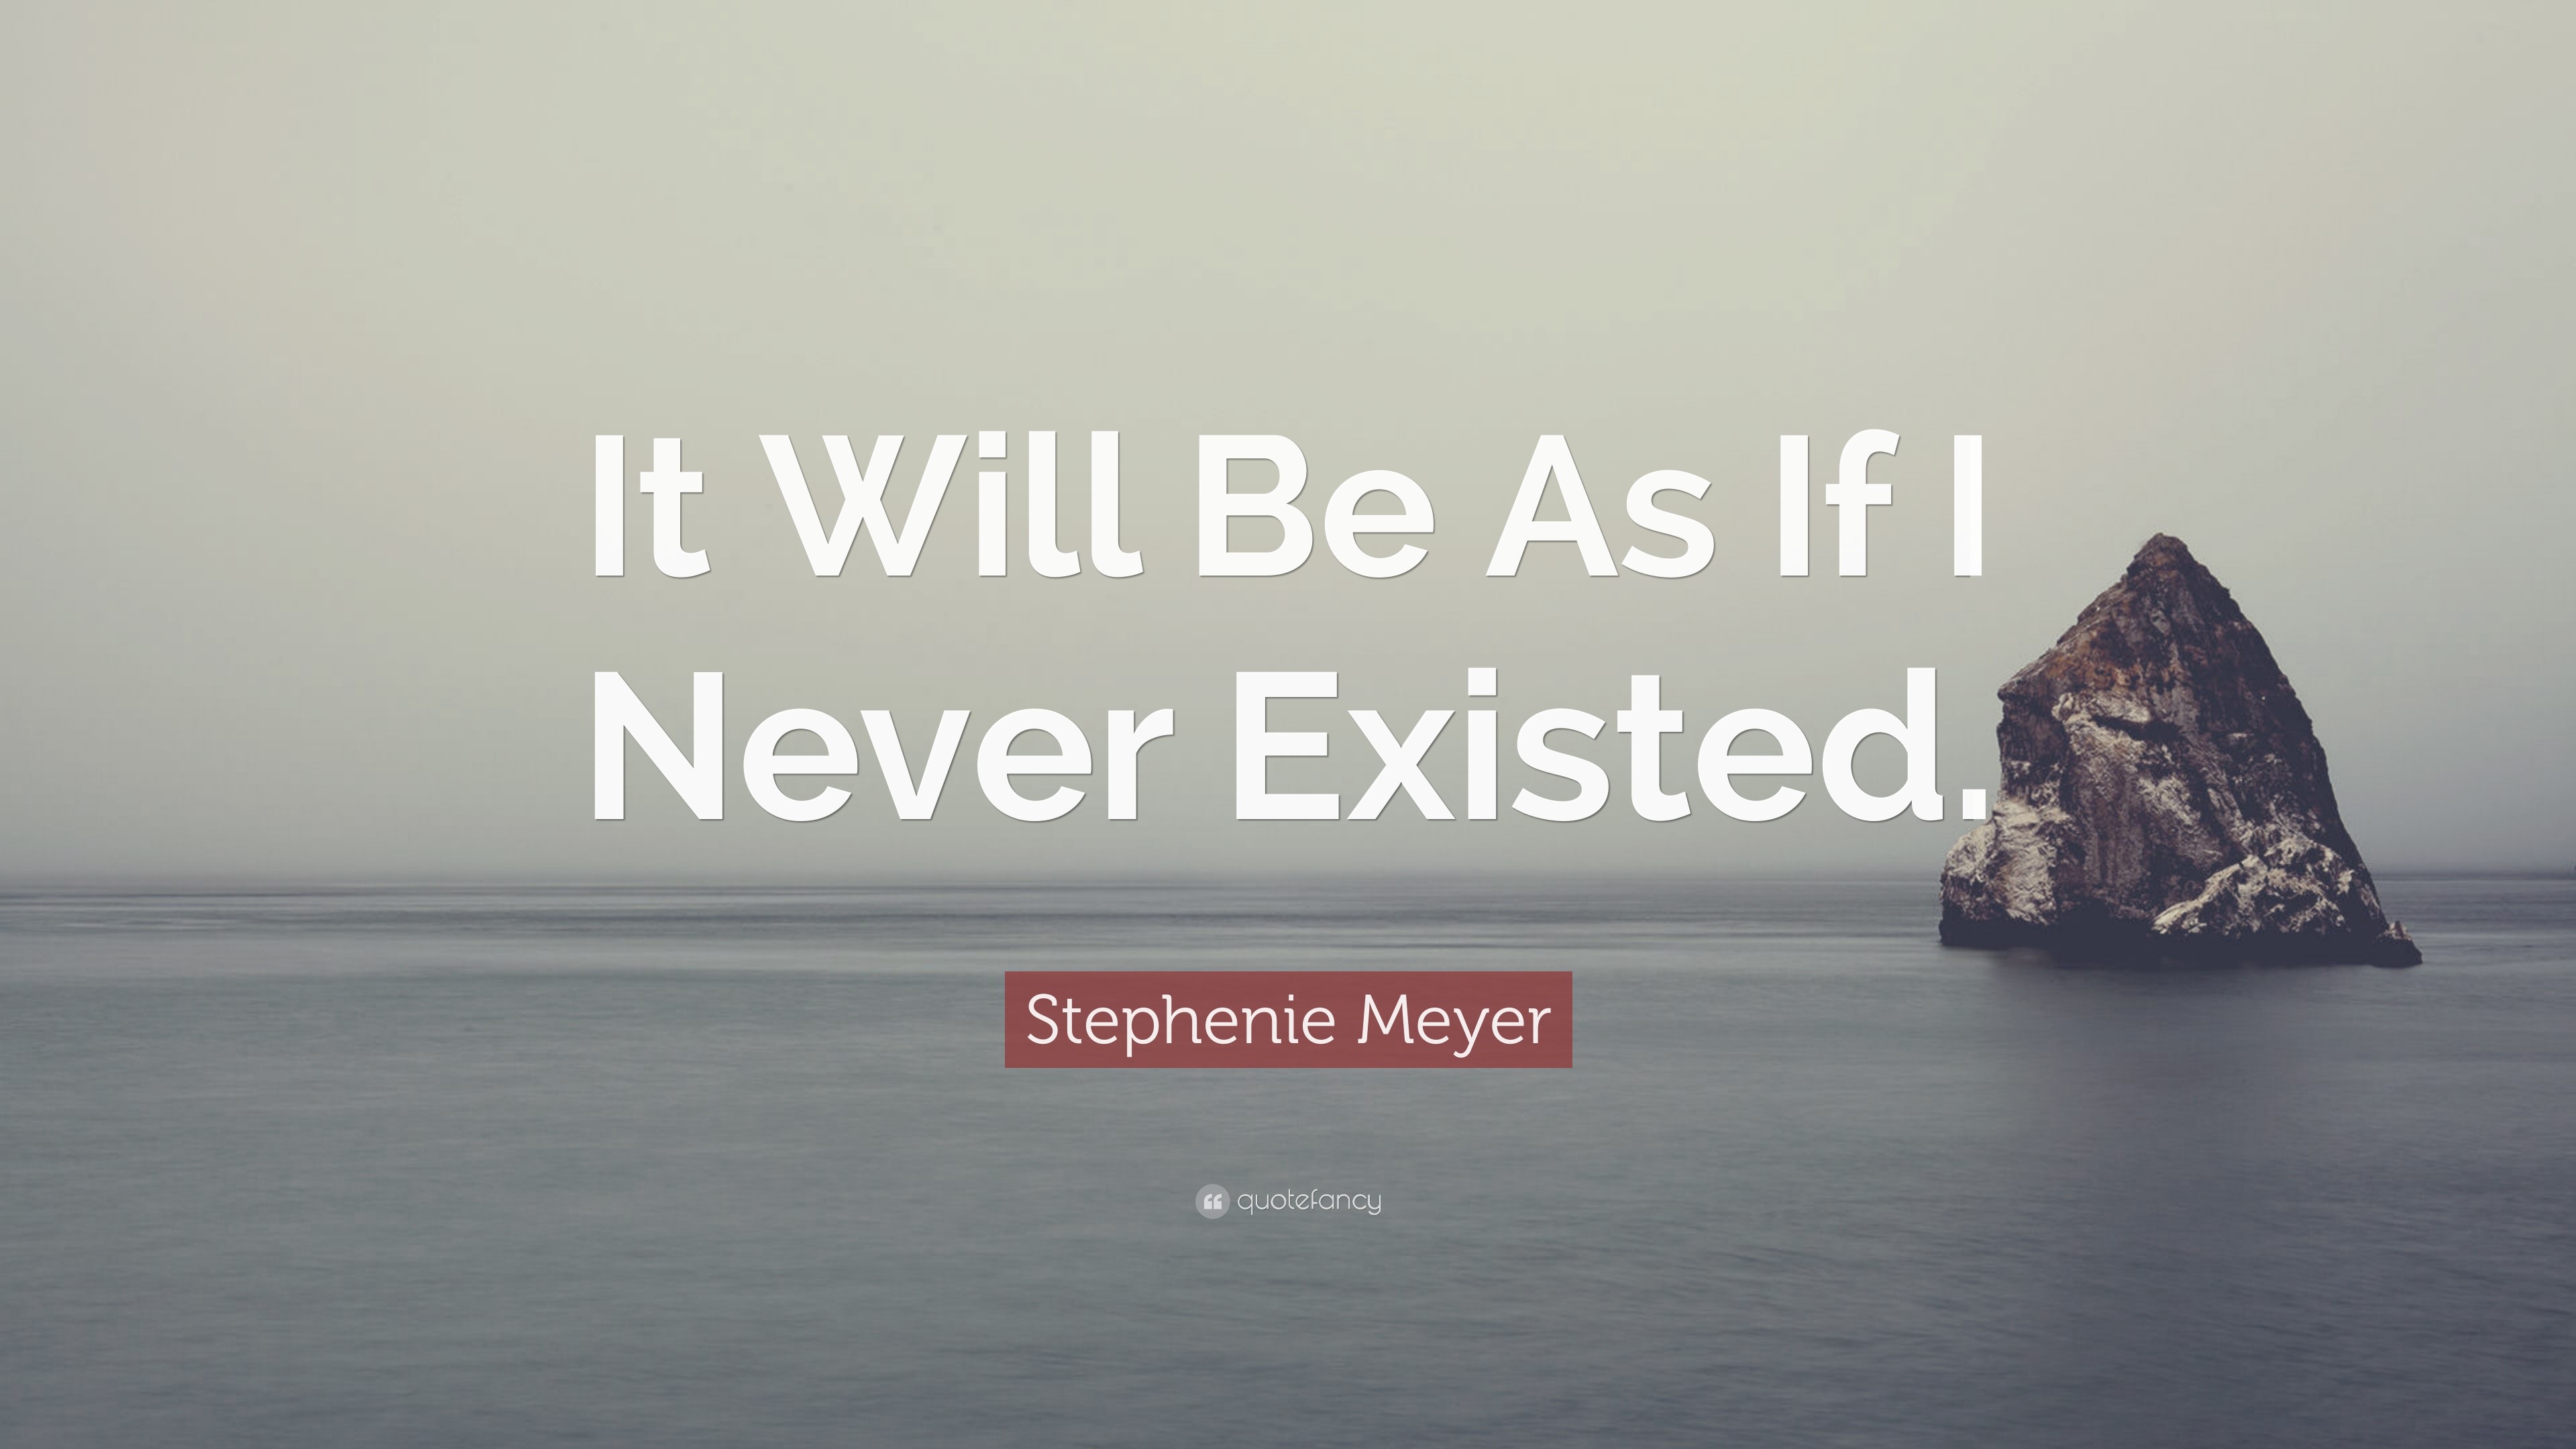 Stephenie Meyer Quote: “It Will Be As If I Never Existed.”